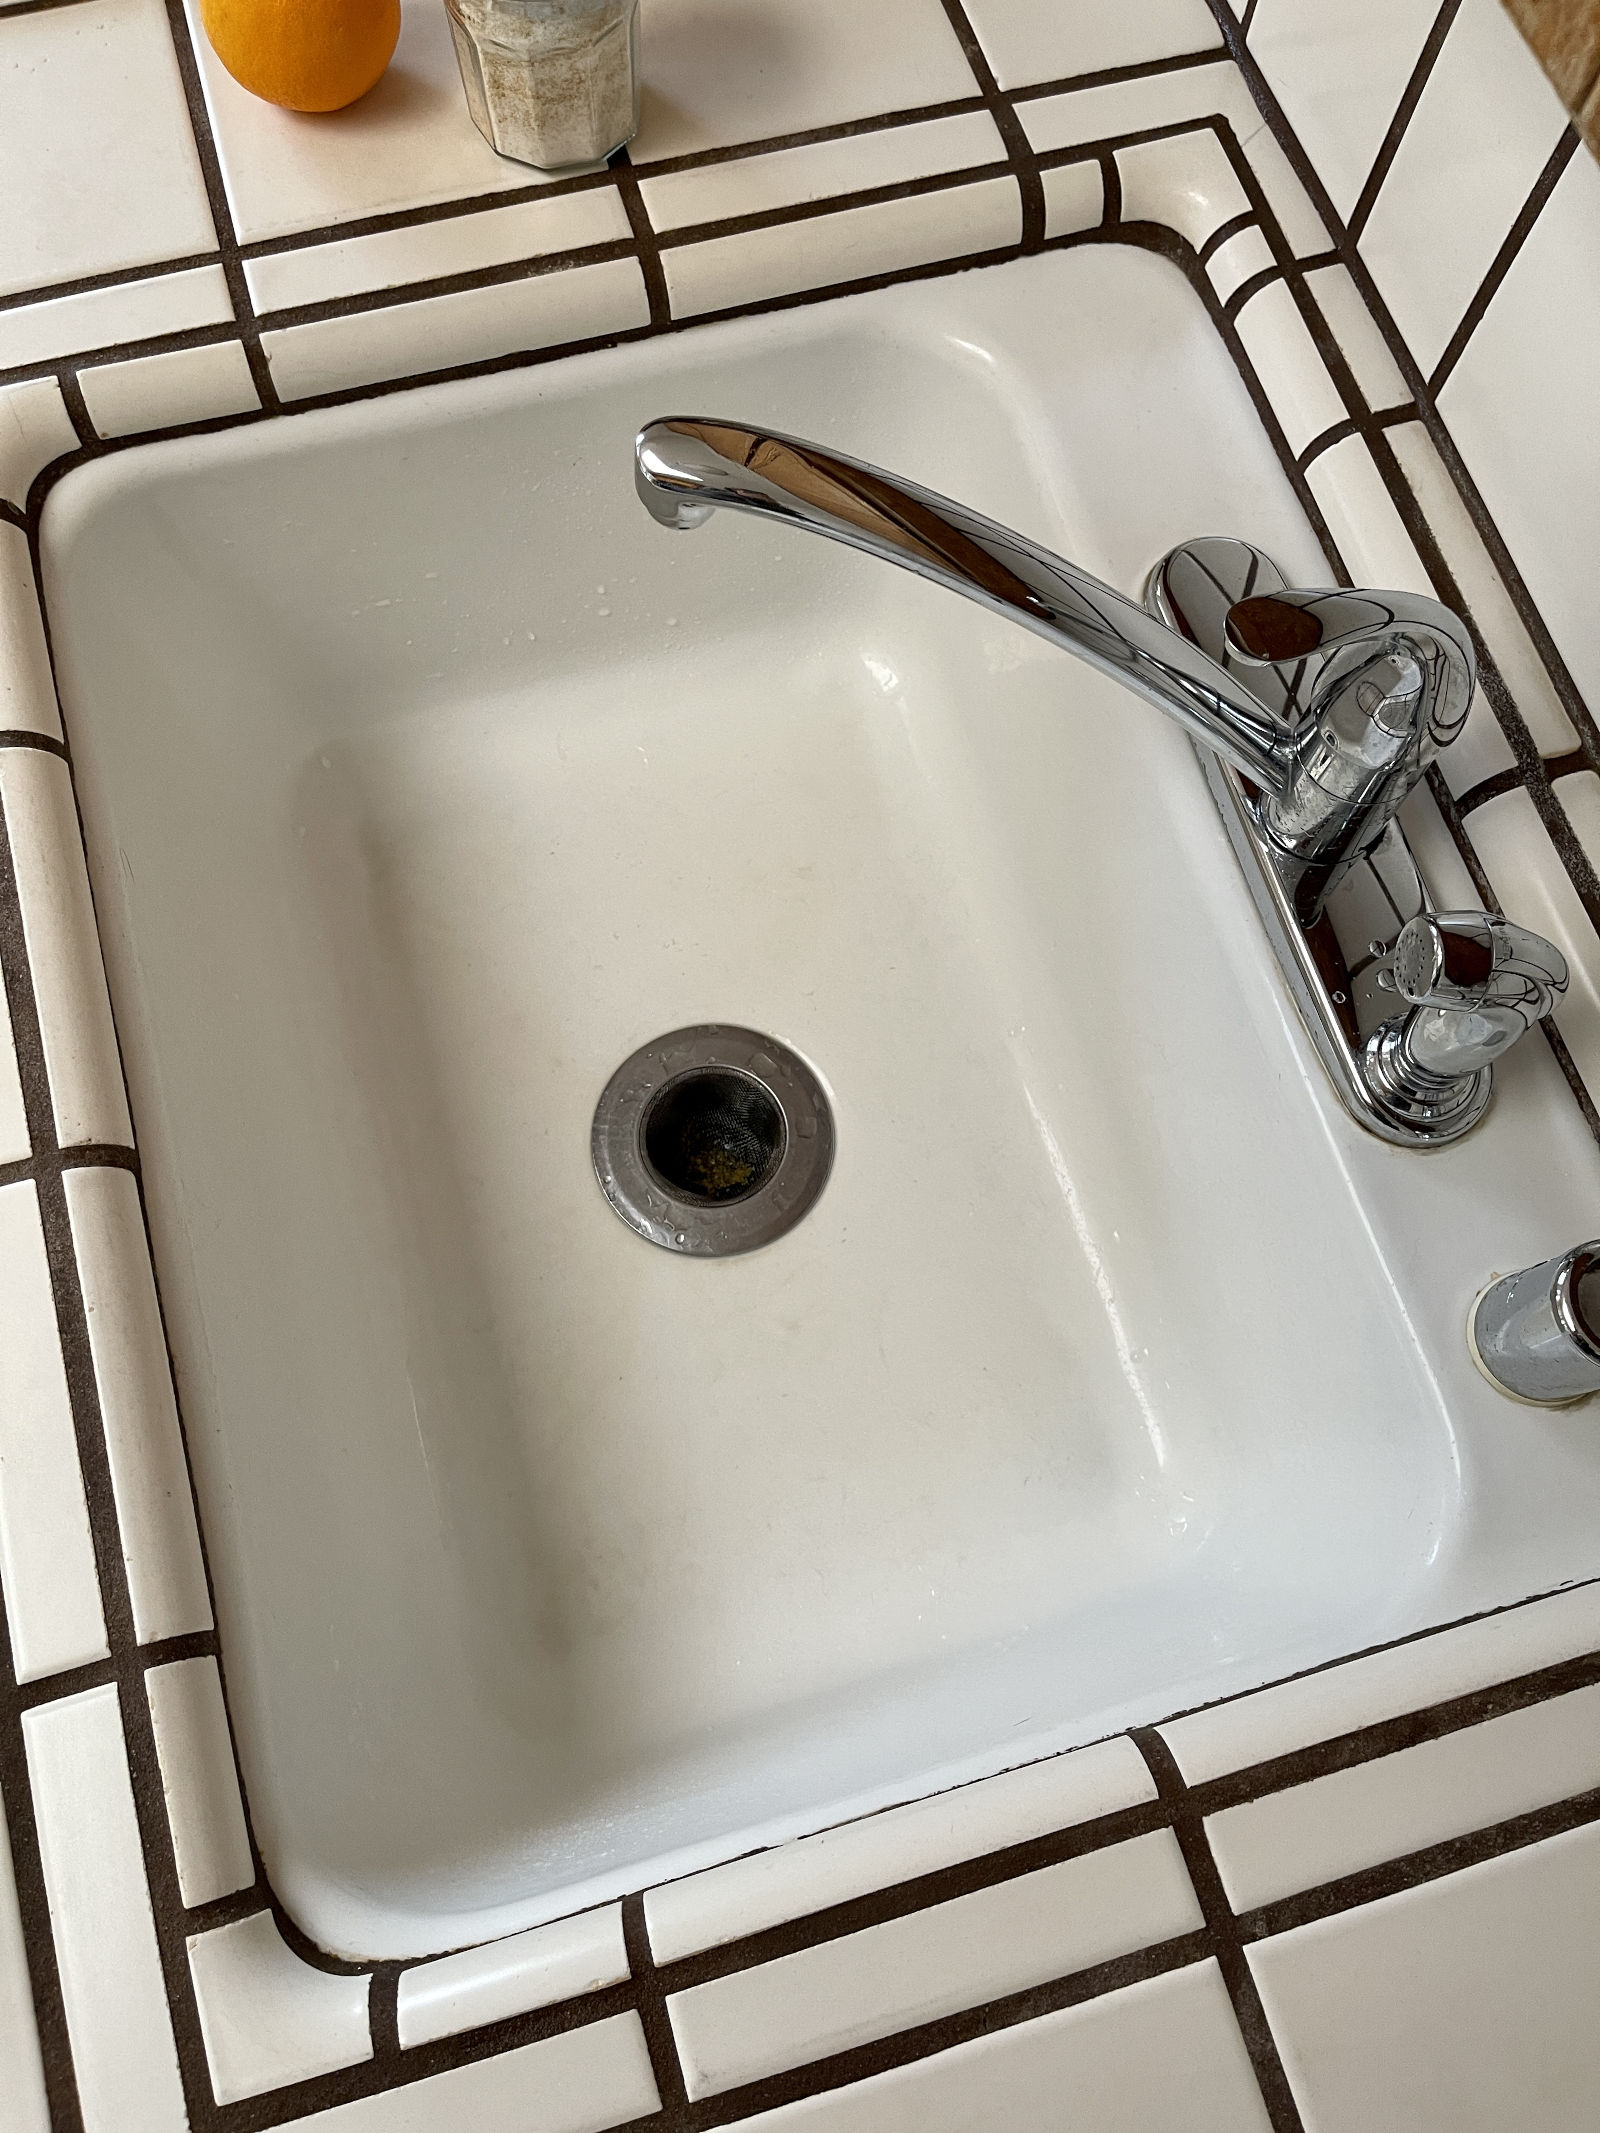 White porcelain kitchen sink after cleaning with homemade scouring powder containing dried citrus zest.